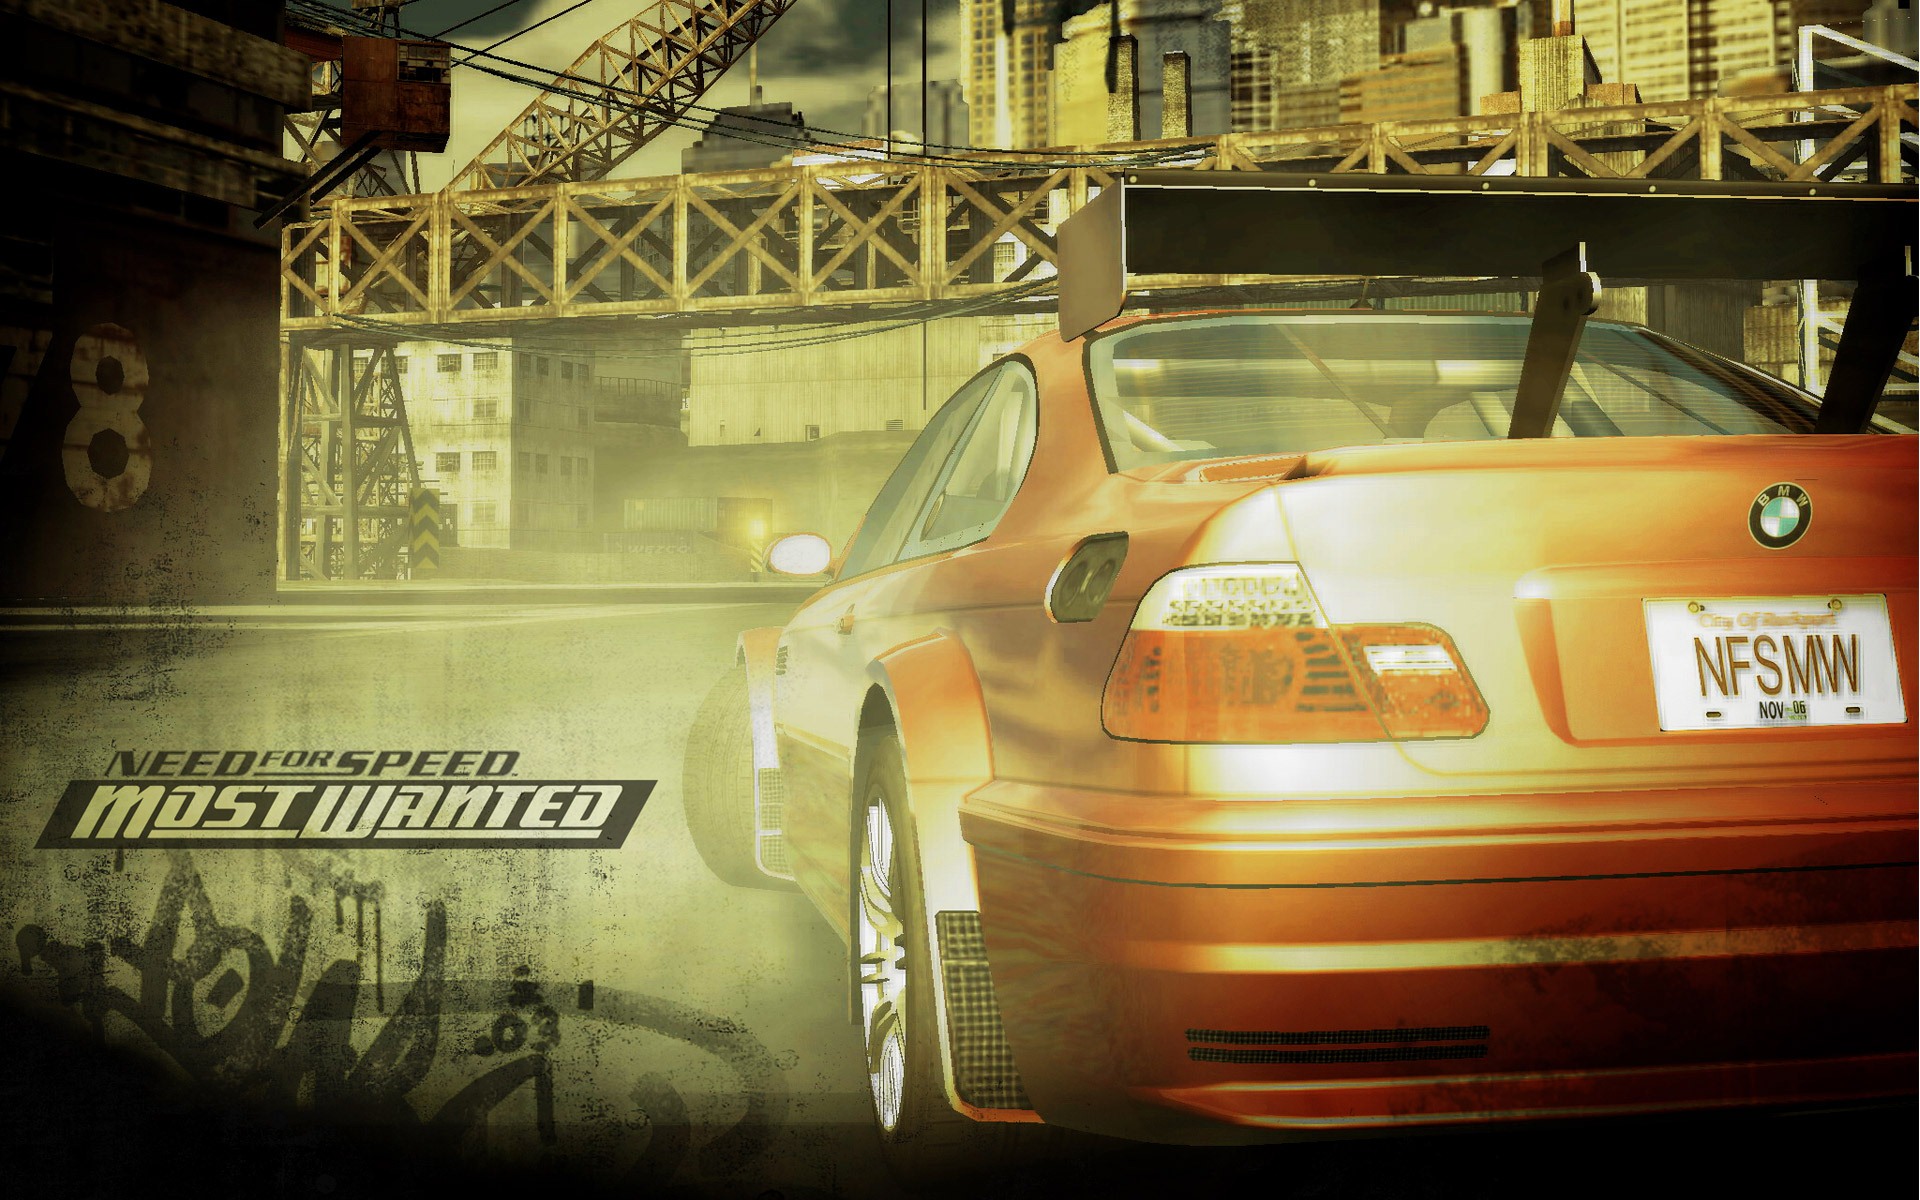 Need for Speed: Most Wanted 极品飞车17：最高通缉 高清壁纸4 - 1920x1200